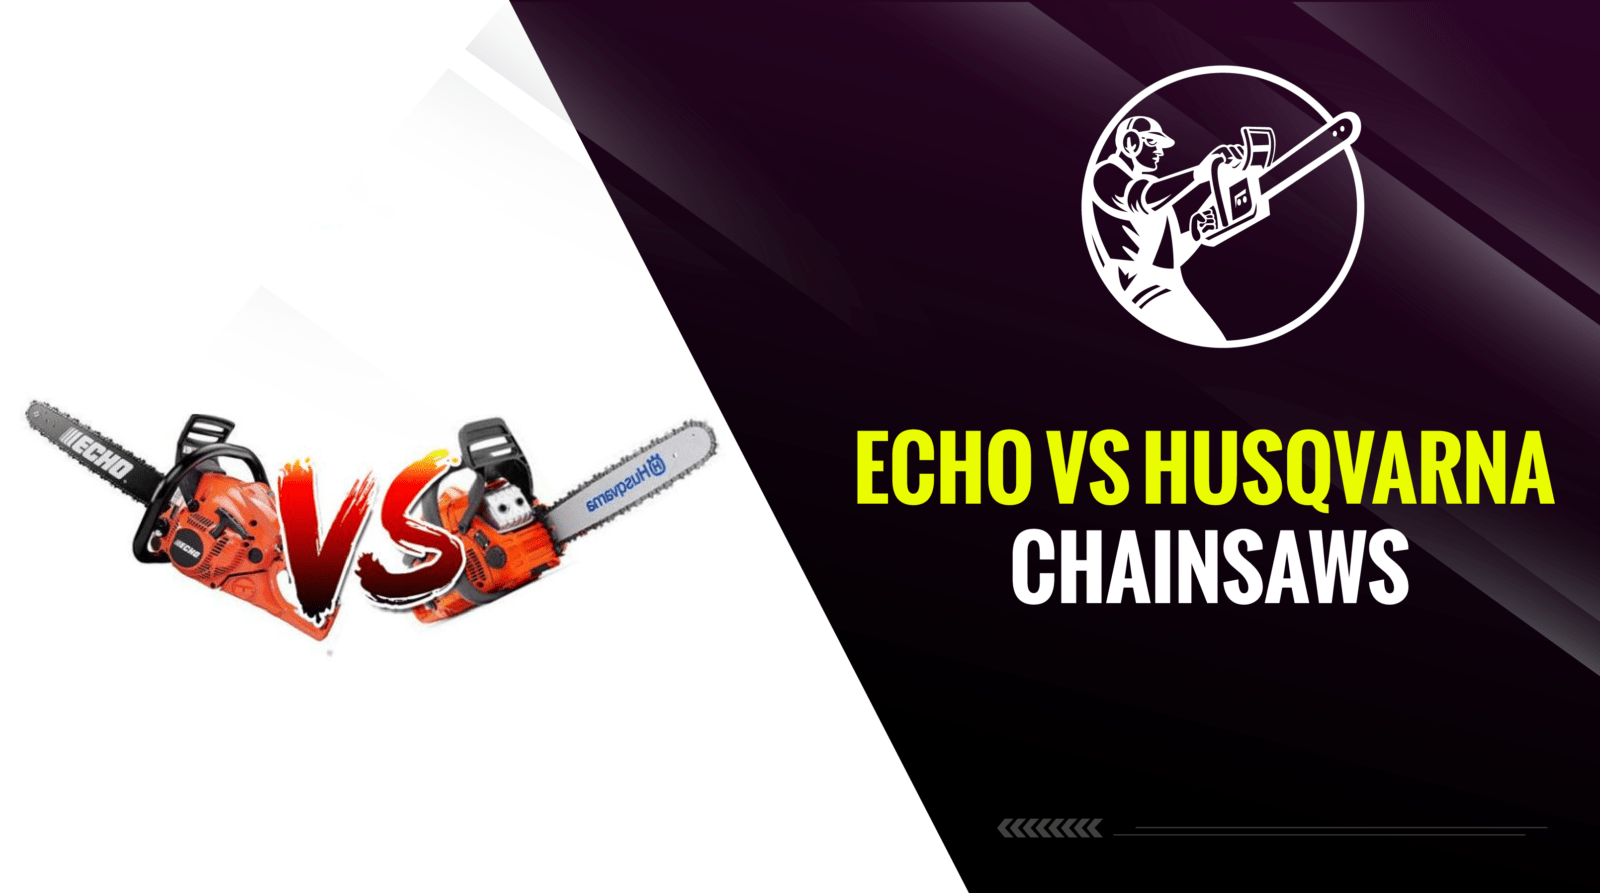 Echo Vs Husqvarna Chainsaws – What Do They Both Offer?